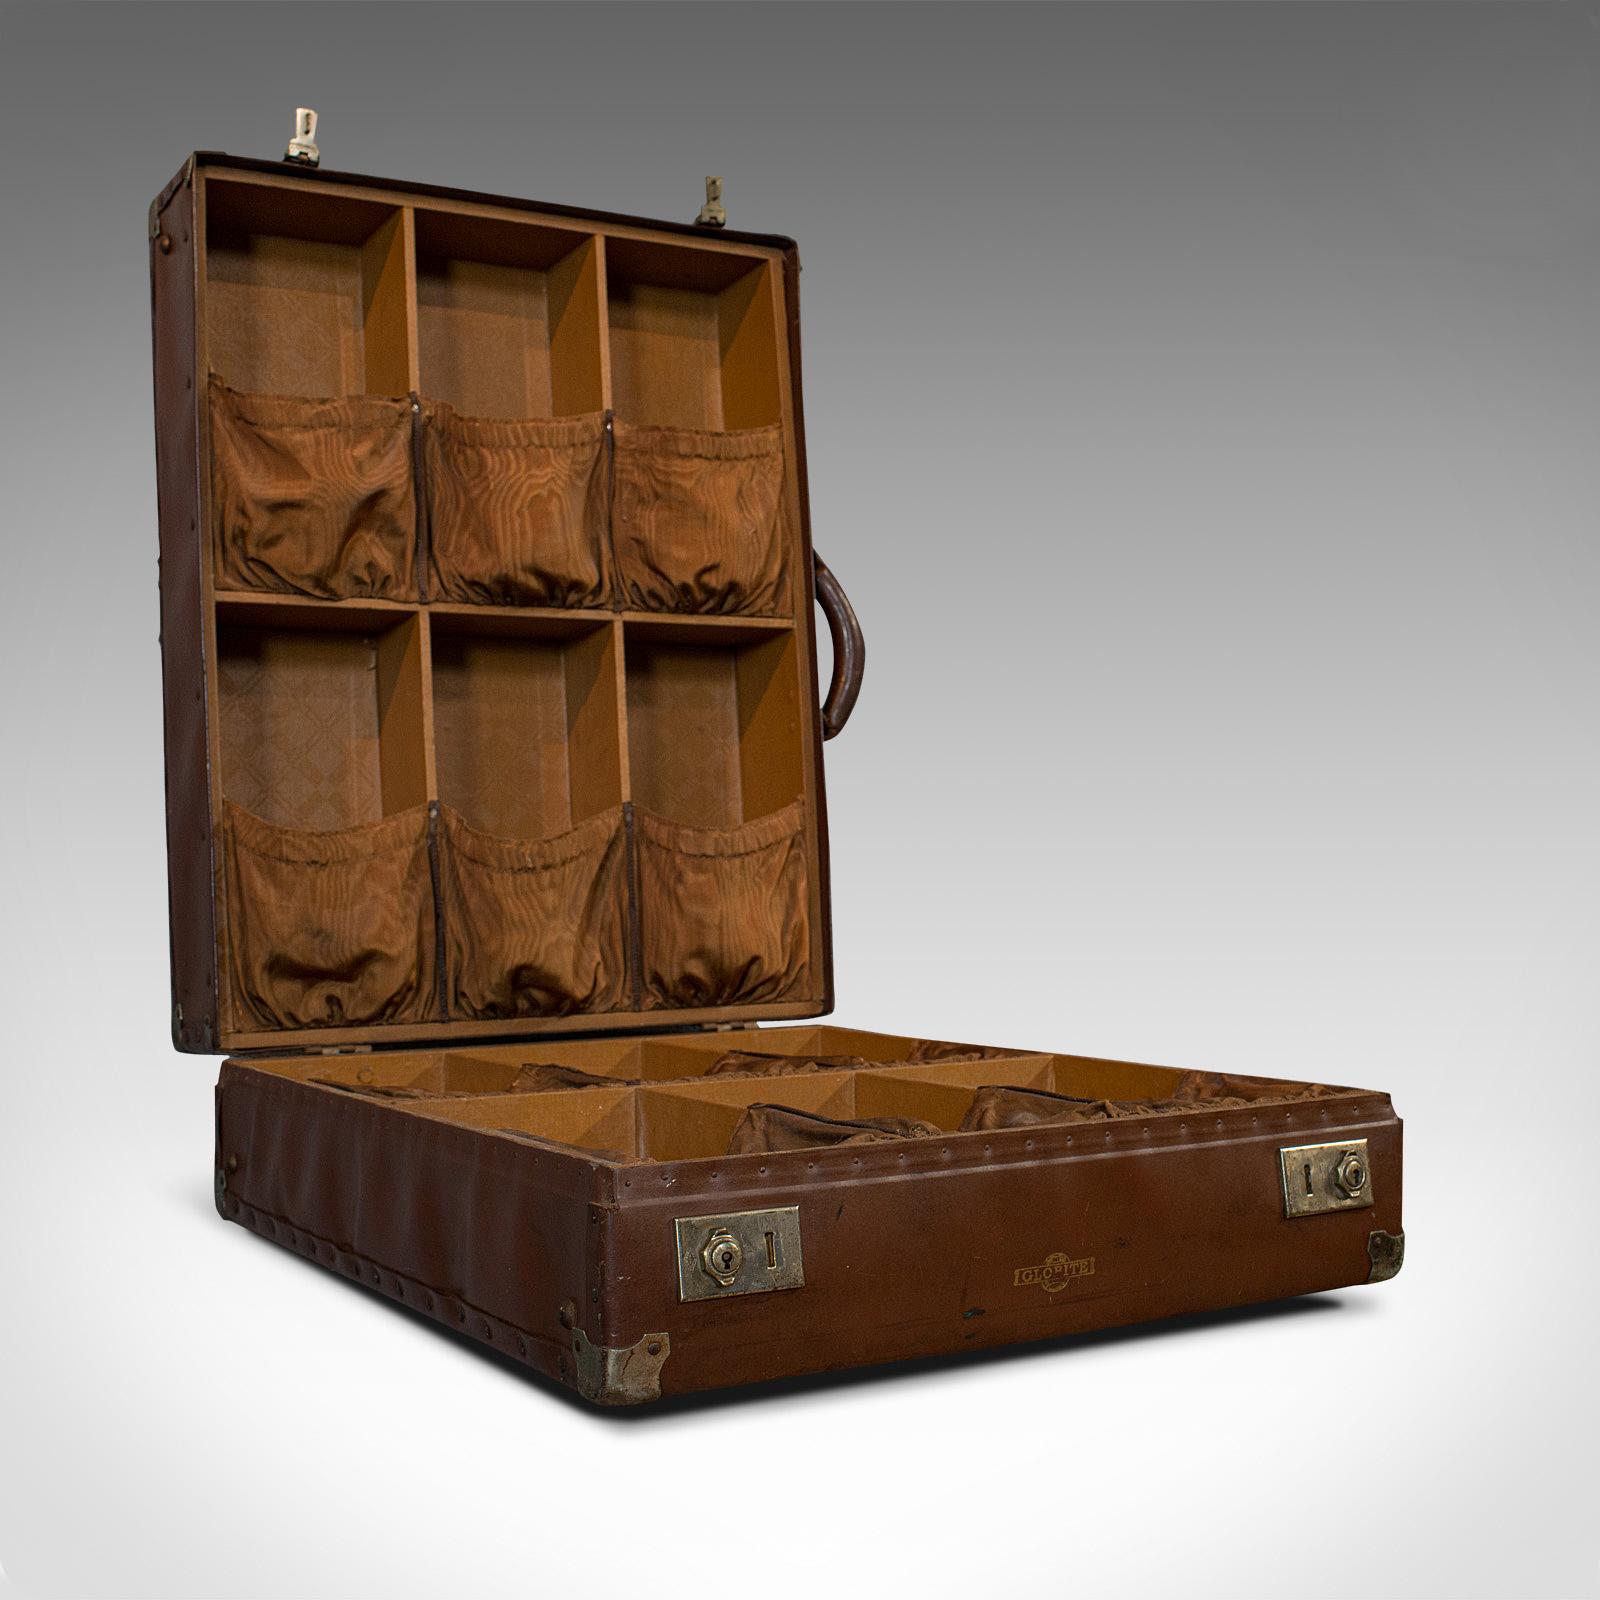 This is a vintage shoe travelling case. An Australian, salesman’s or collectors travel trunk by Globite, dating to the early 20th century, circa 1930.

Fascinating travel case
Displays a desirable aged patina
Rich brown hues to the case